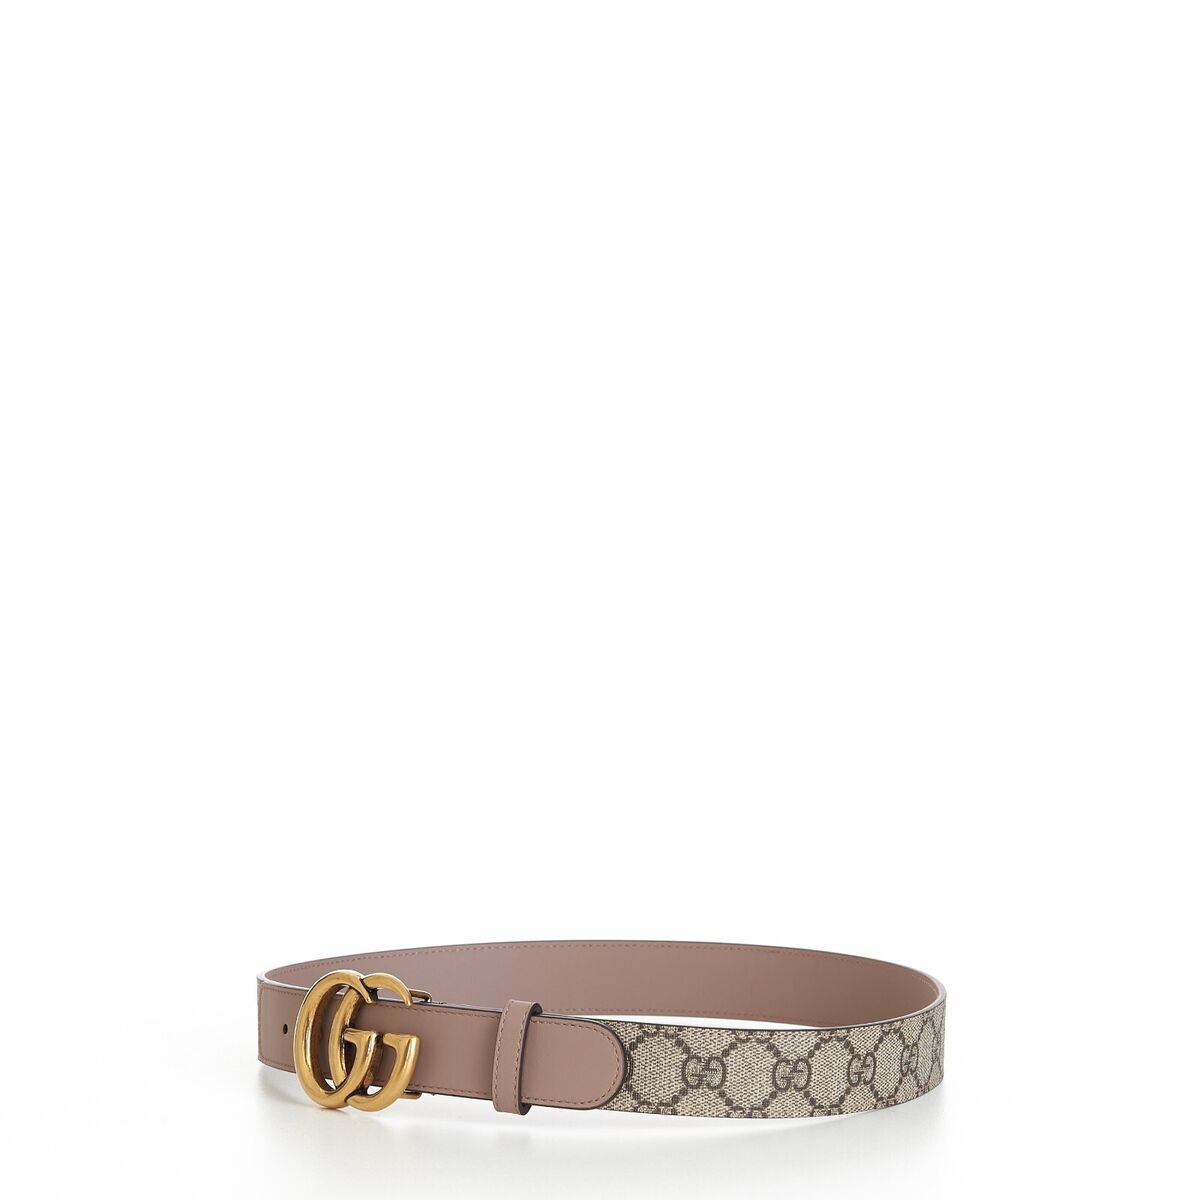 GUCCI 430$ GG Marmont Belt In Beige GG Supreme & Pink Leather